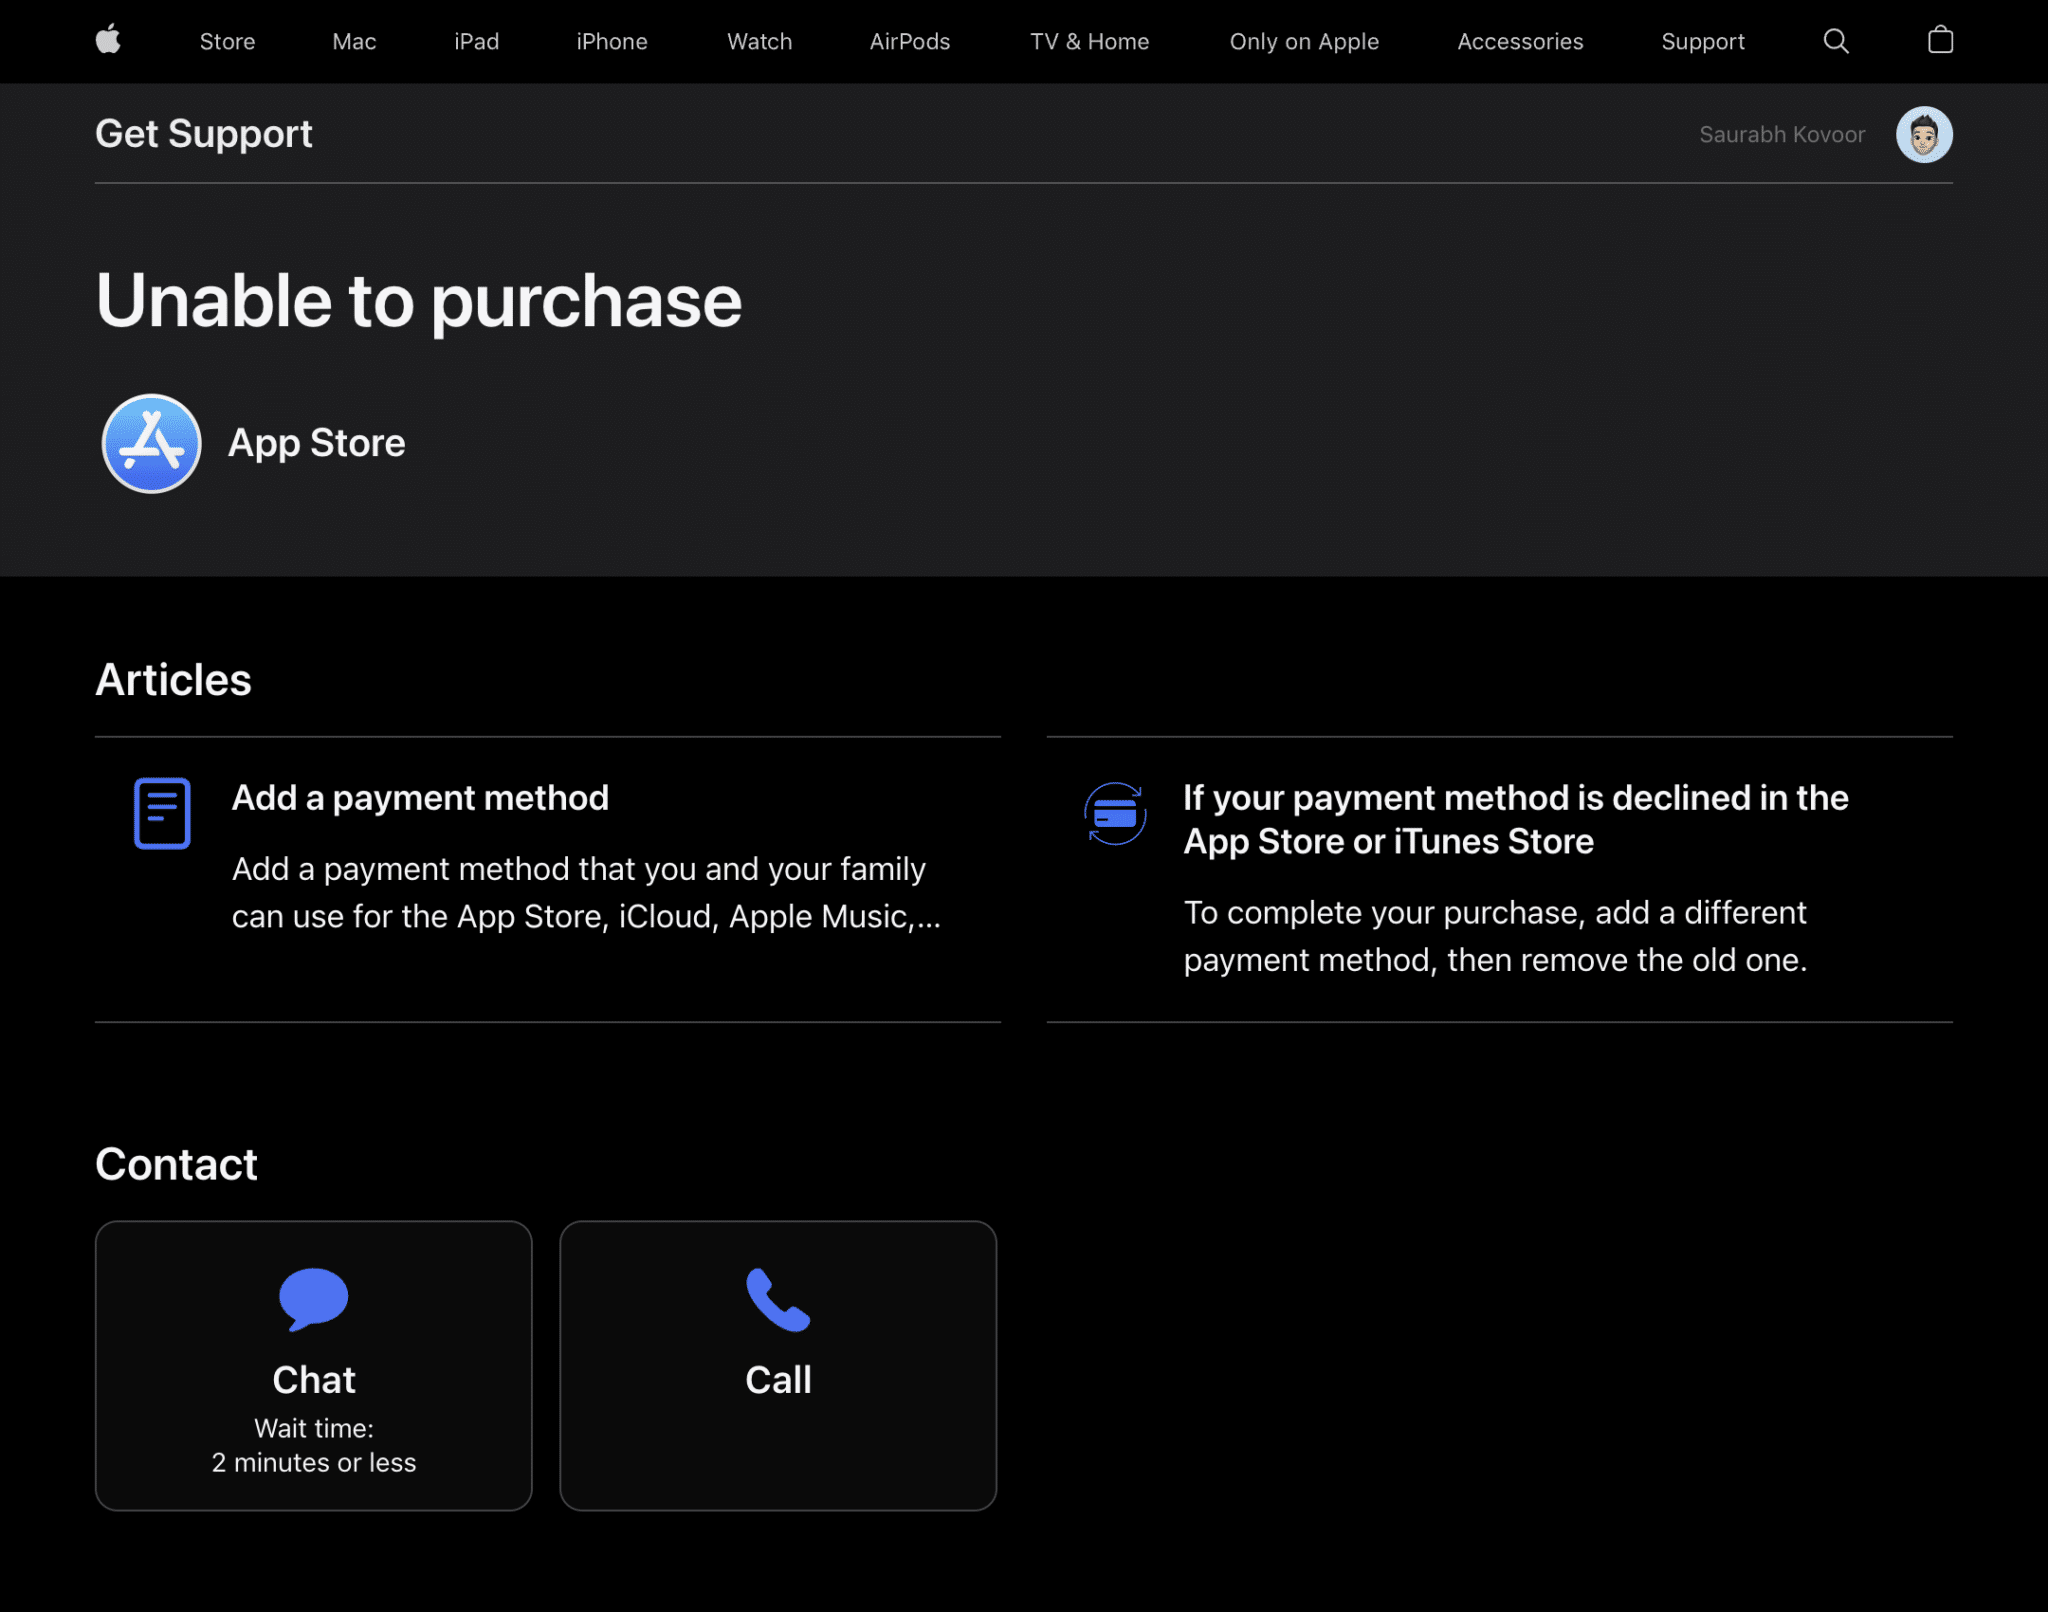 Contact Apple Support through the official support page to fix Apple App Store “Payment Not Completed” or “Your Purchase Could Not Be Completed” errors on iPhone, macOS, or iPad